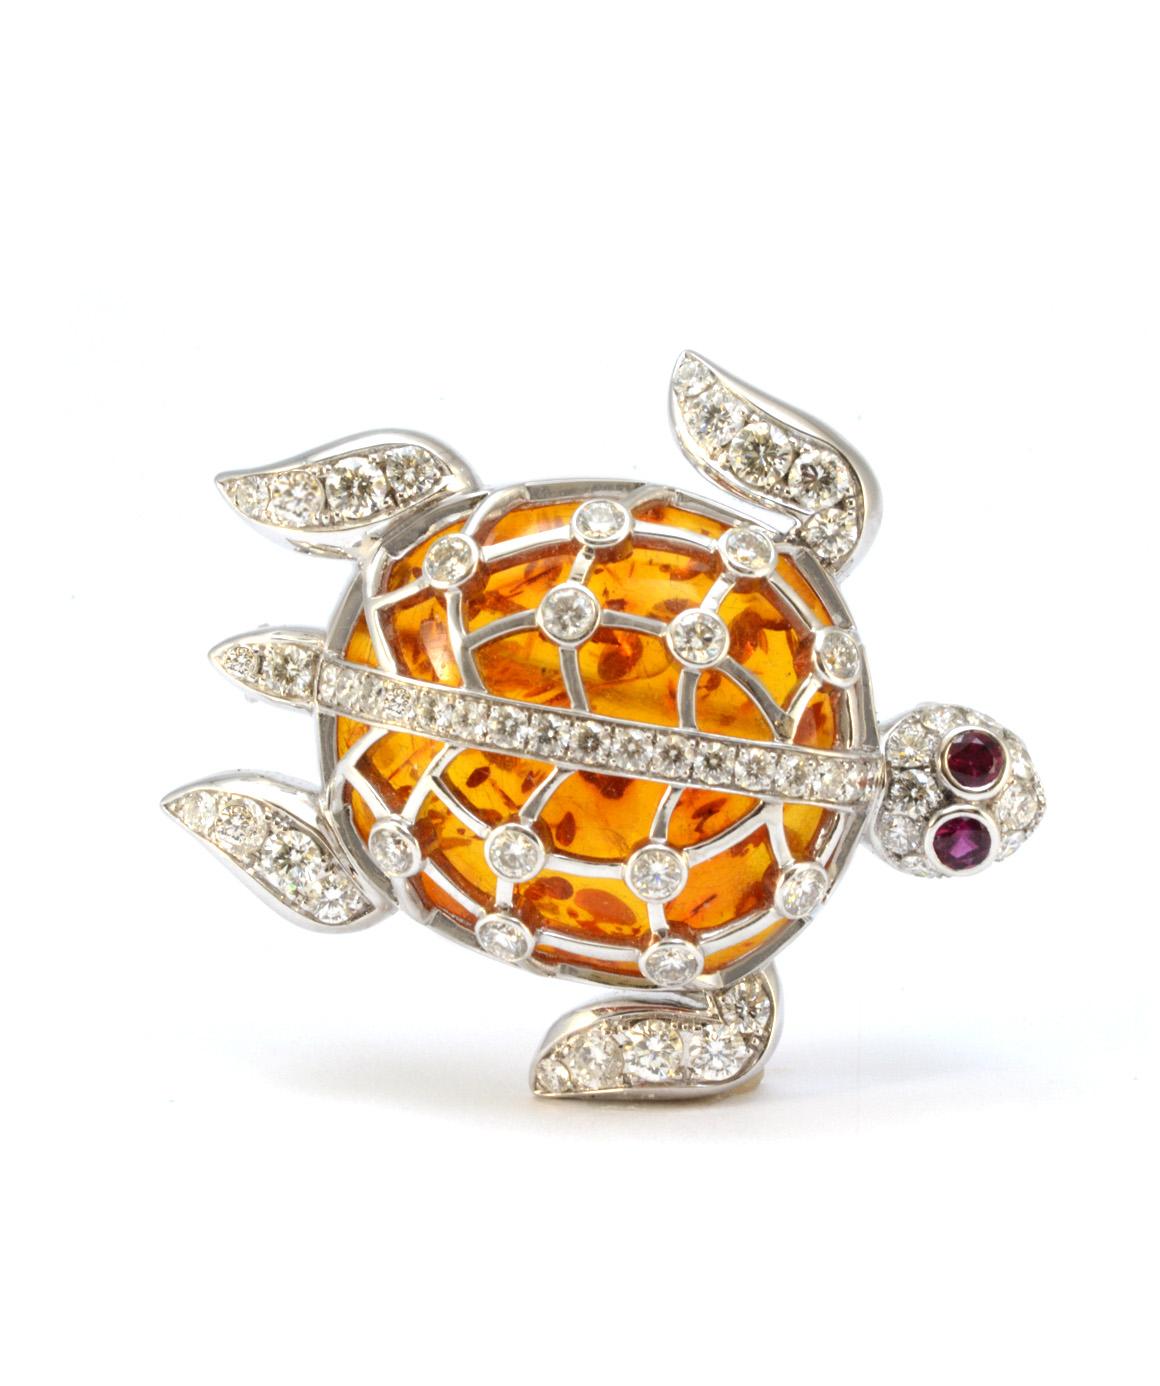 This solid 18k white gold amber, diamond and ruby turtle brooch/pendant is in excellent condition! Measuring approximately 1.5 inches X 1.3 inches, this turtle brooch can be worn as a pin or a pendant. It features 2 ruby eyes measuring approximately